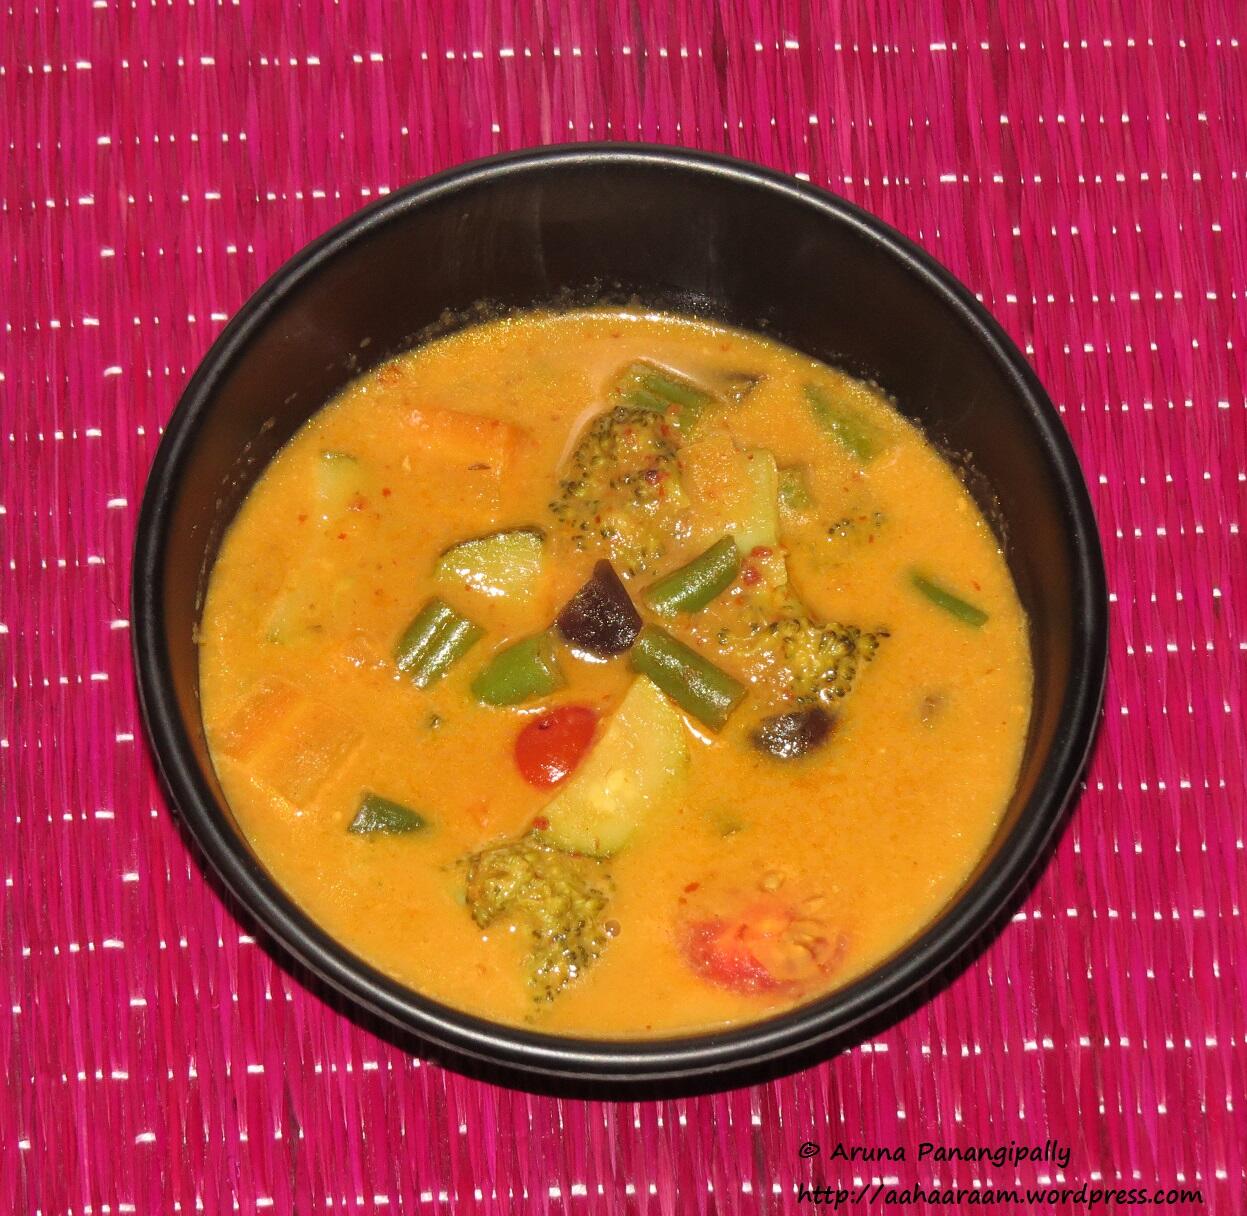 Kalio Tempe - Vegetables in Galangal and Coconut Milk Gravy. This Balinese specialty from Indonesia